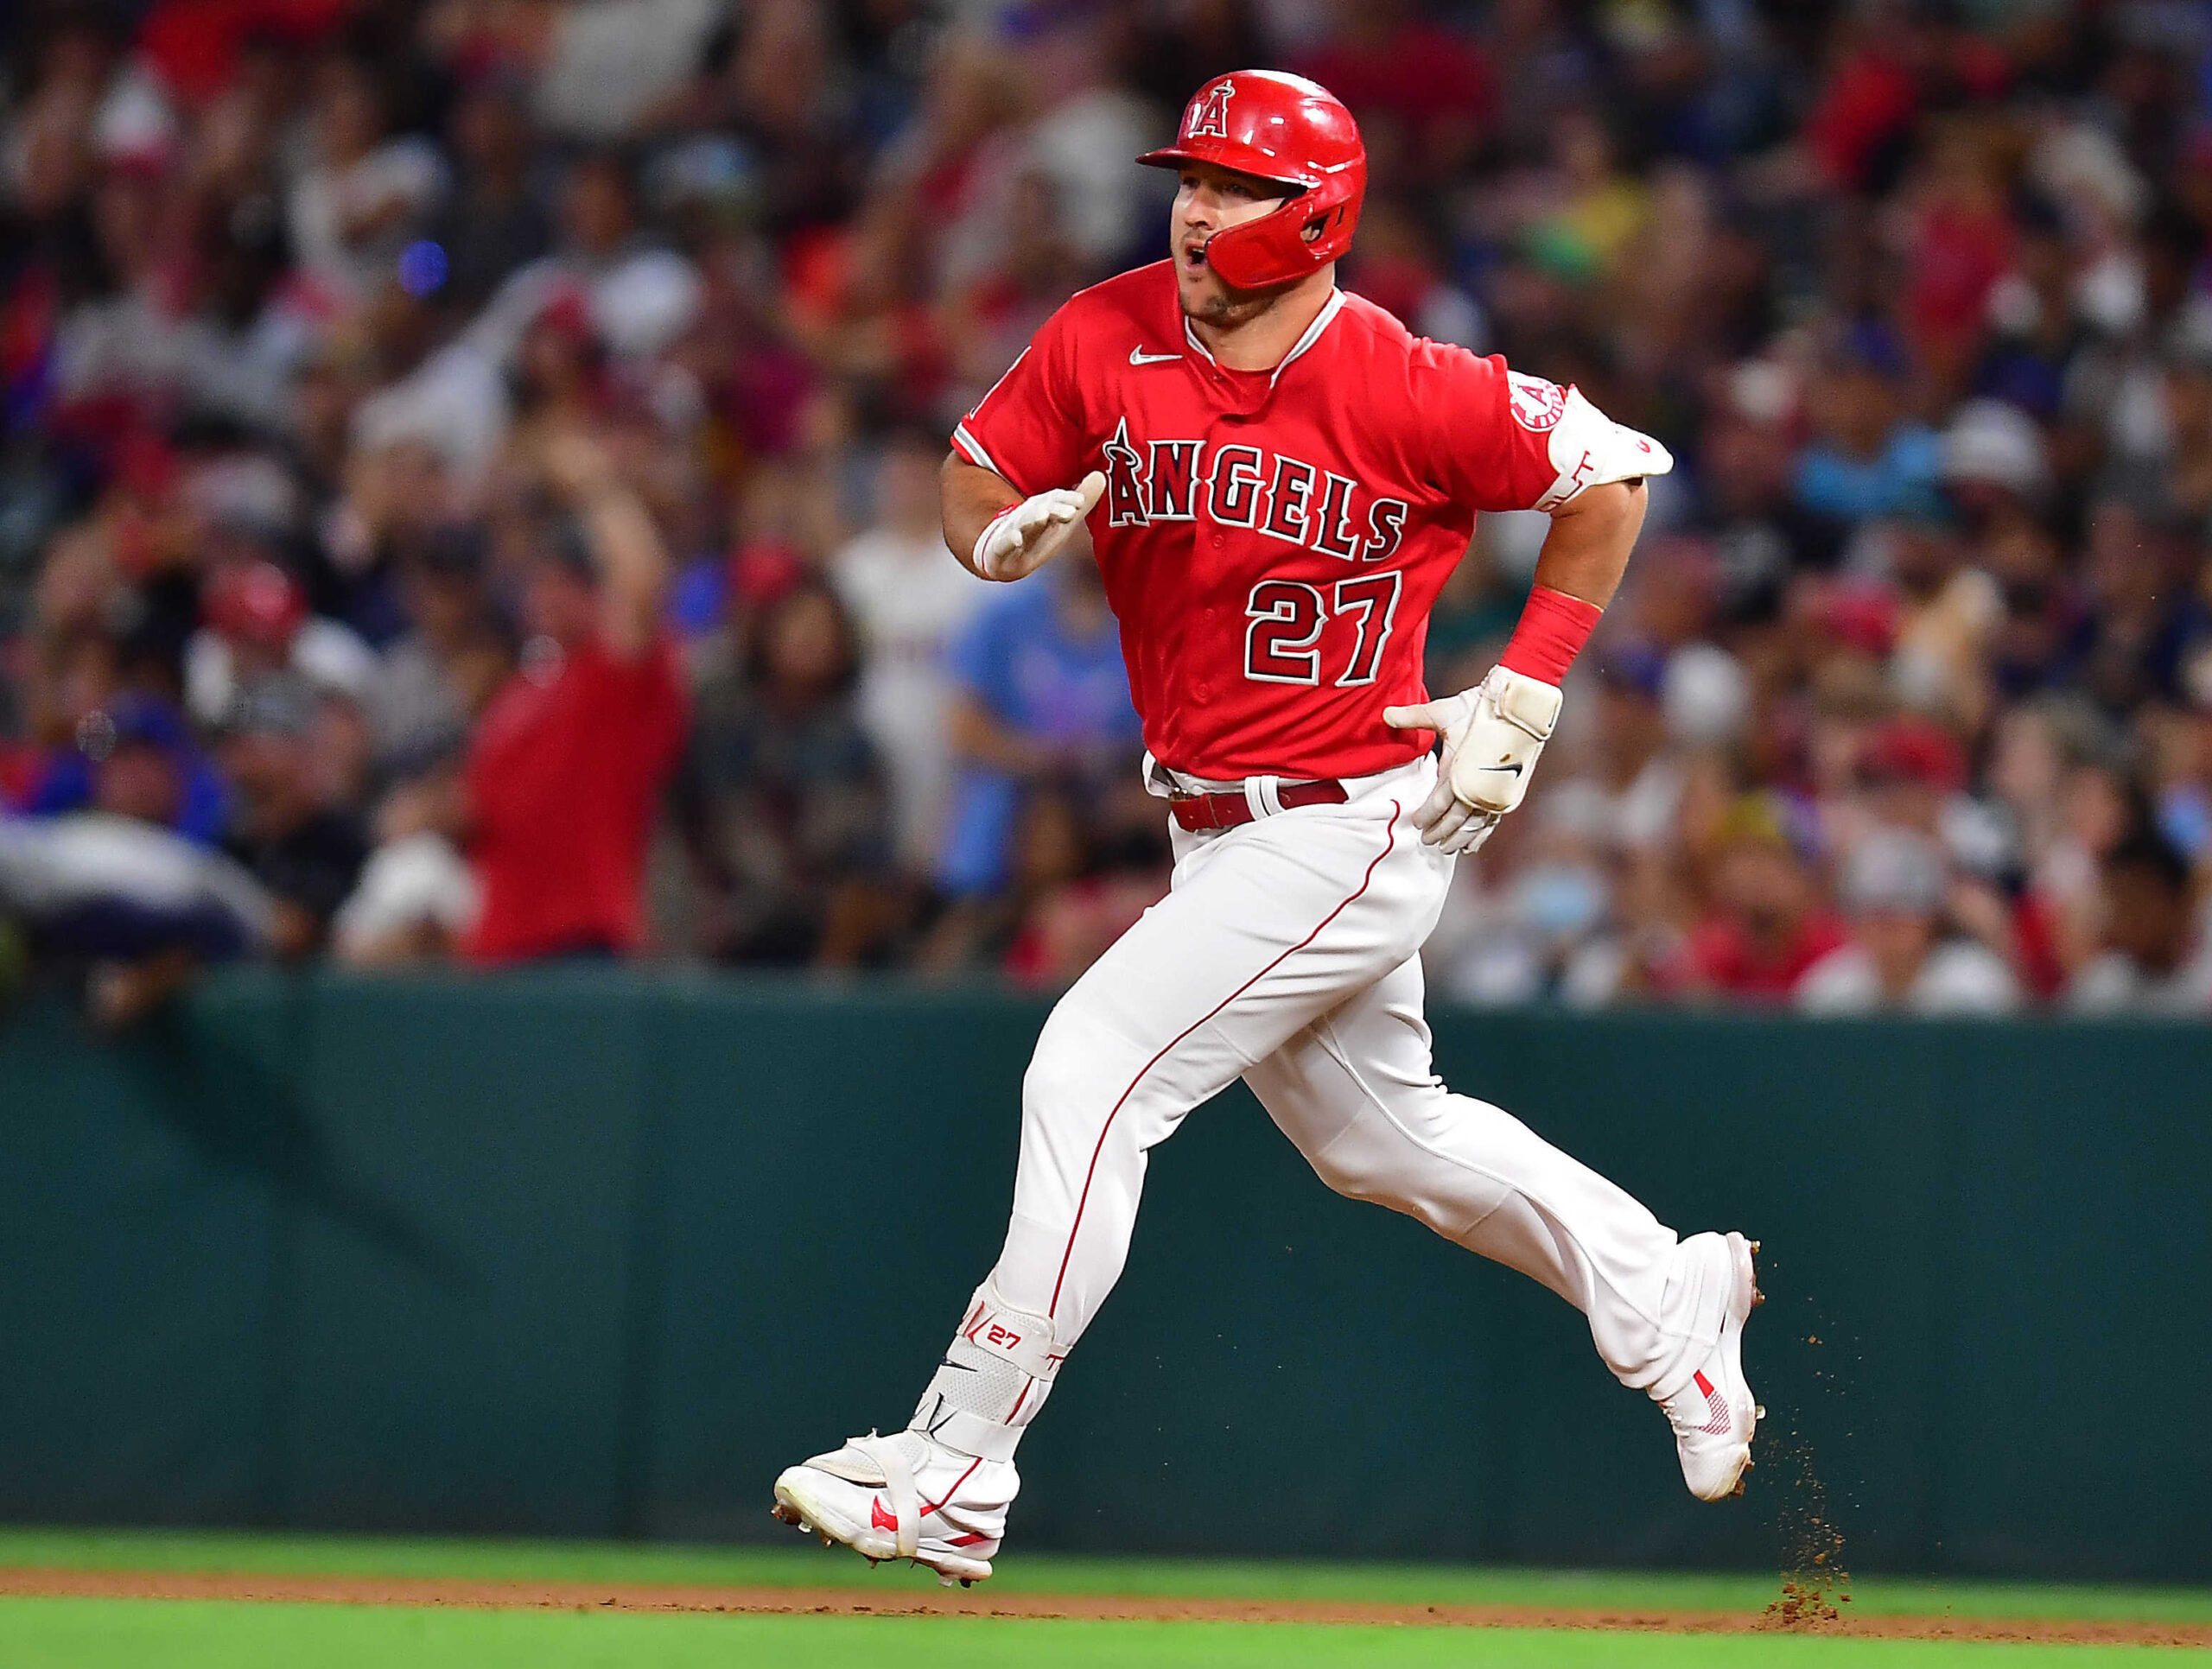 Mike Trout hits 5th home run in 5-game series - Newsday